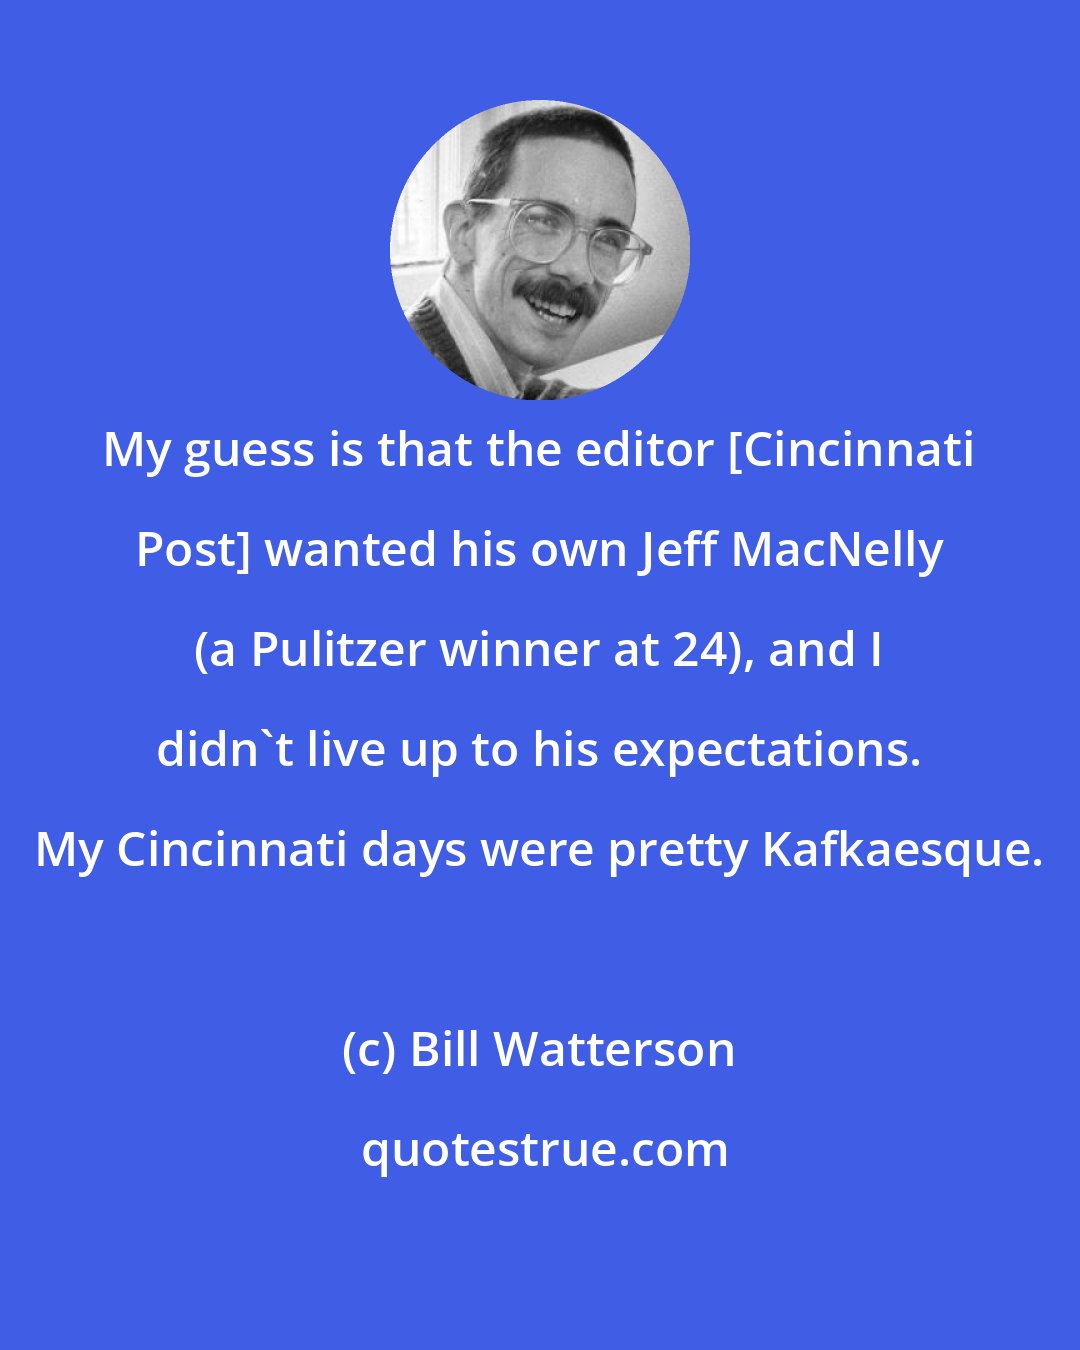 Bill Watterson: My guess is that the editor [Cincinnati Post] wanted his own Jeff MacNelly (a Pulitzer winner at 24), and I didn't live up to his expectations. My Cincinnati days were pretty Kafkaesque.